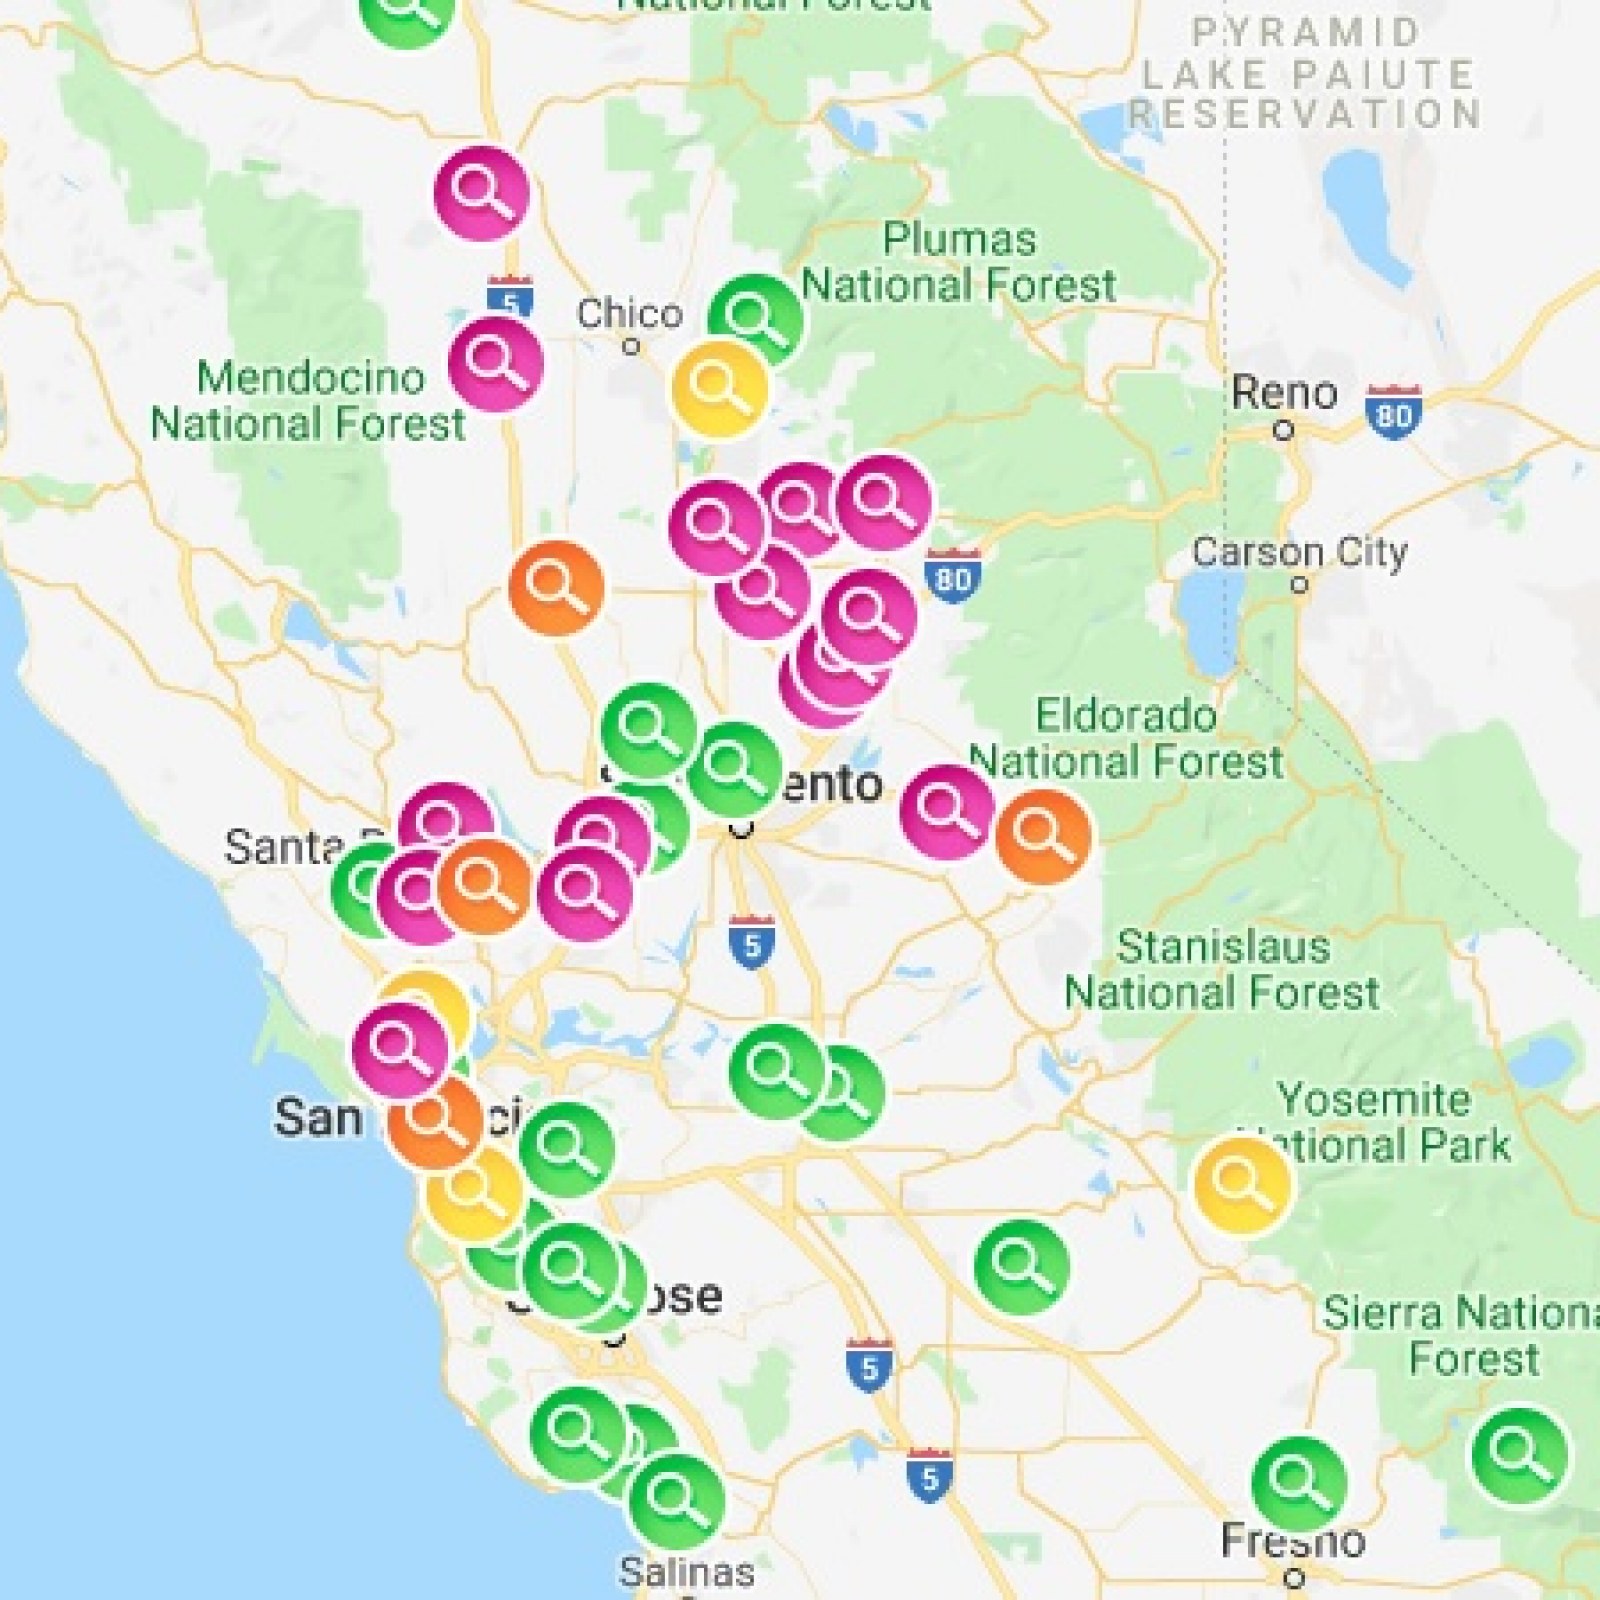 Local Power Outage Map PG&E Power Outage Update, Shutoff Map as More Than 800,000 